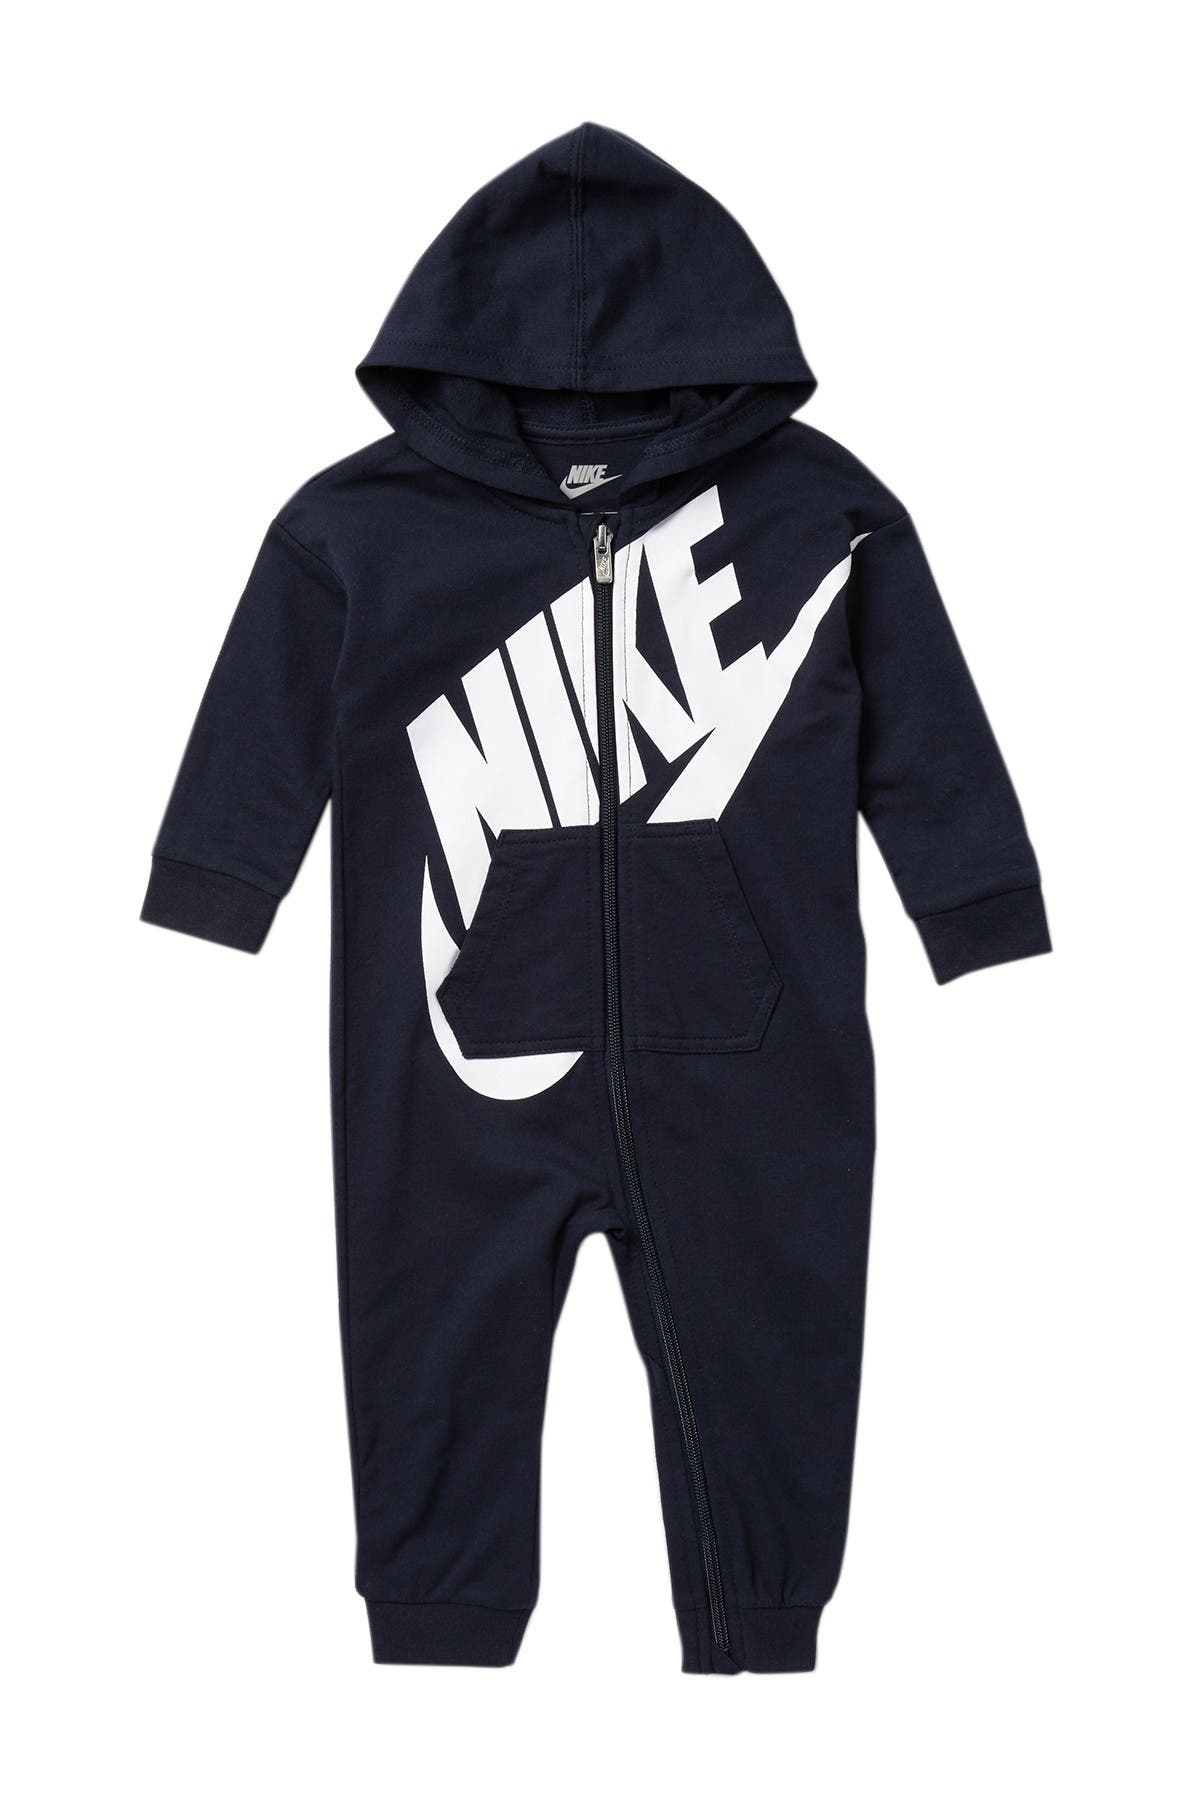 Nike | All Day Play Hooded Coverall 